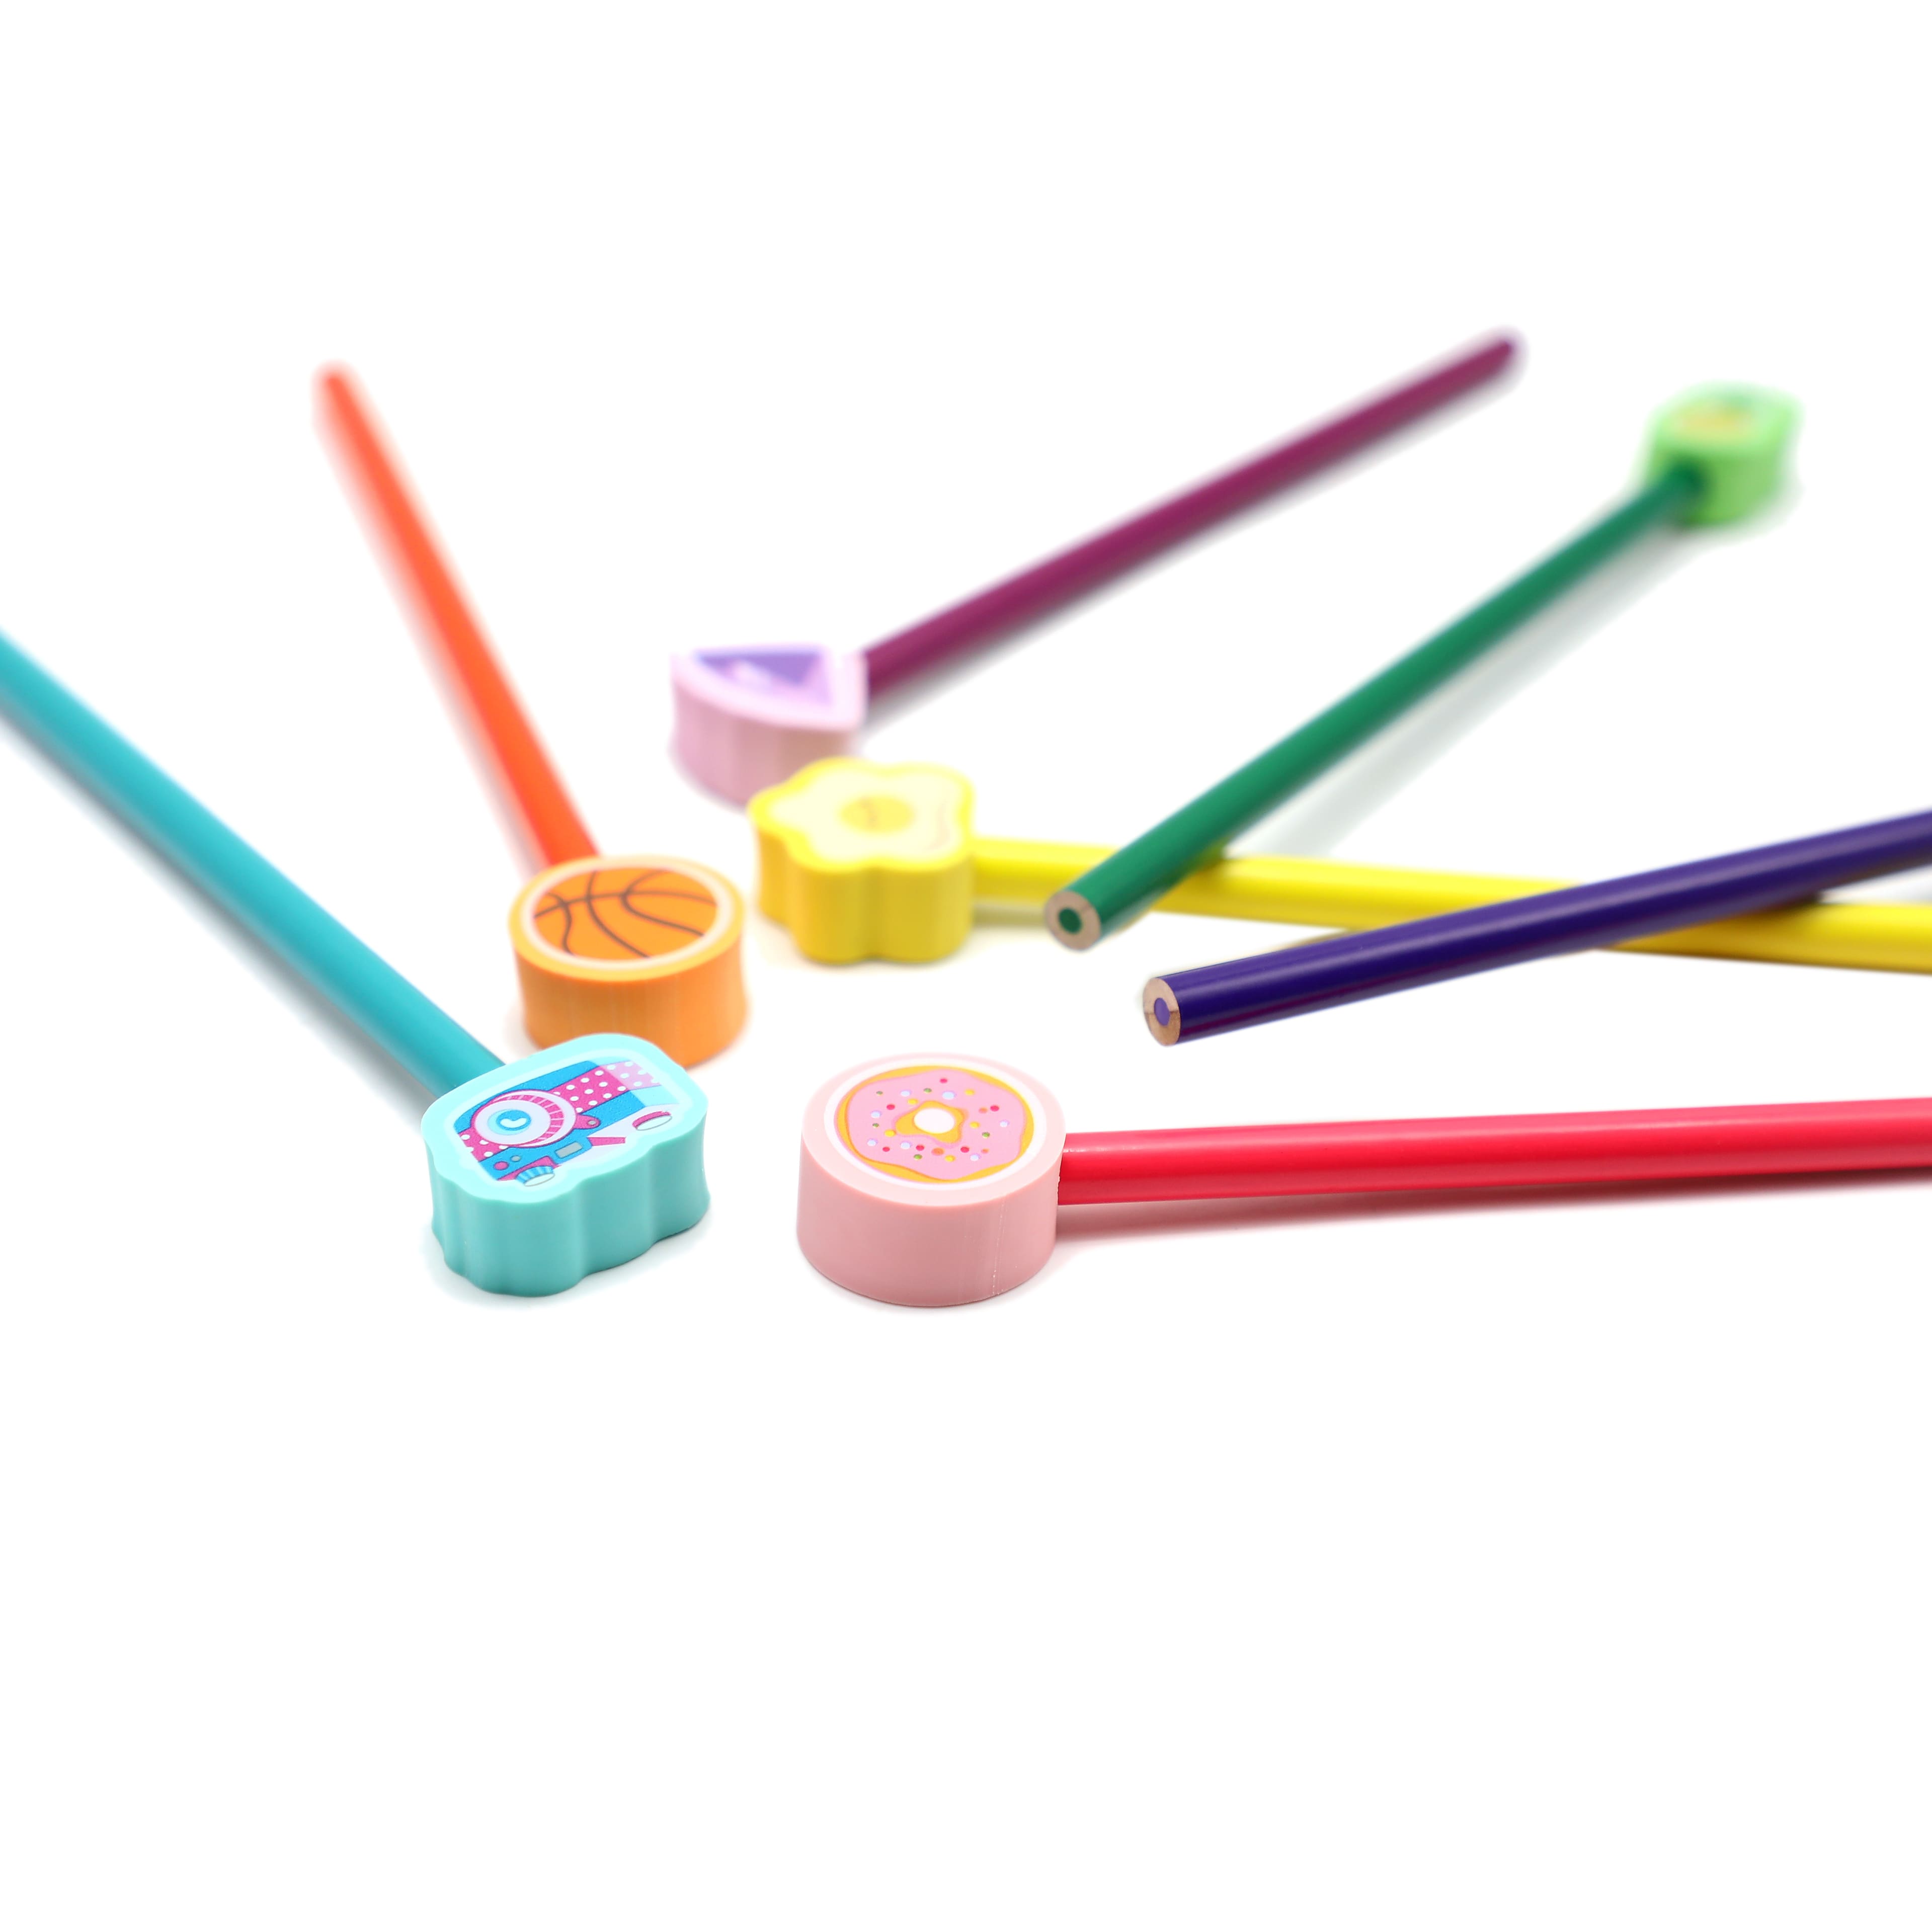 Food-Themed Pencil Party Set by B2C&#x2122;